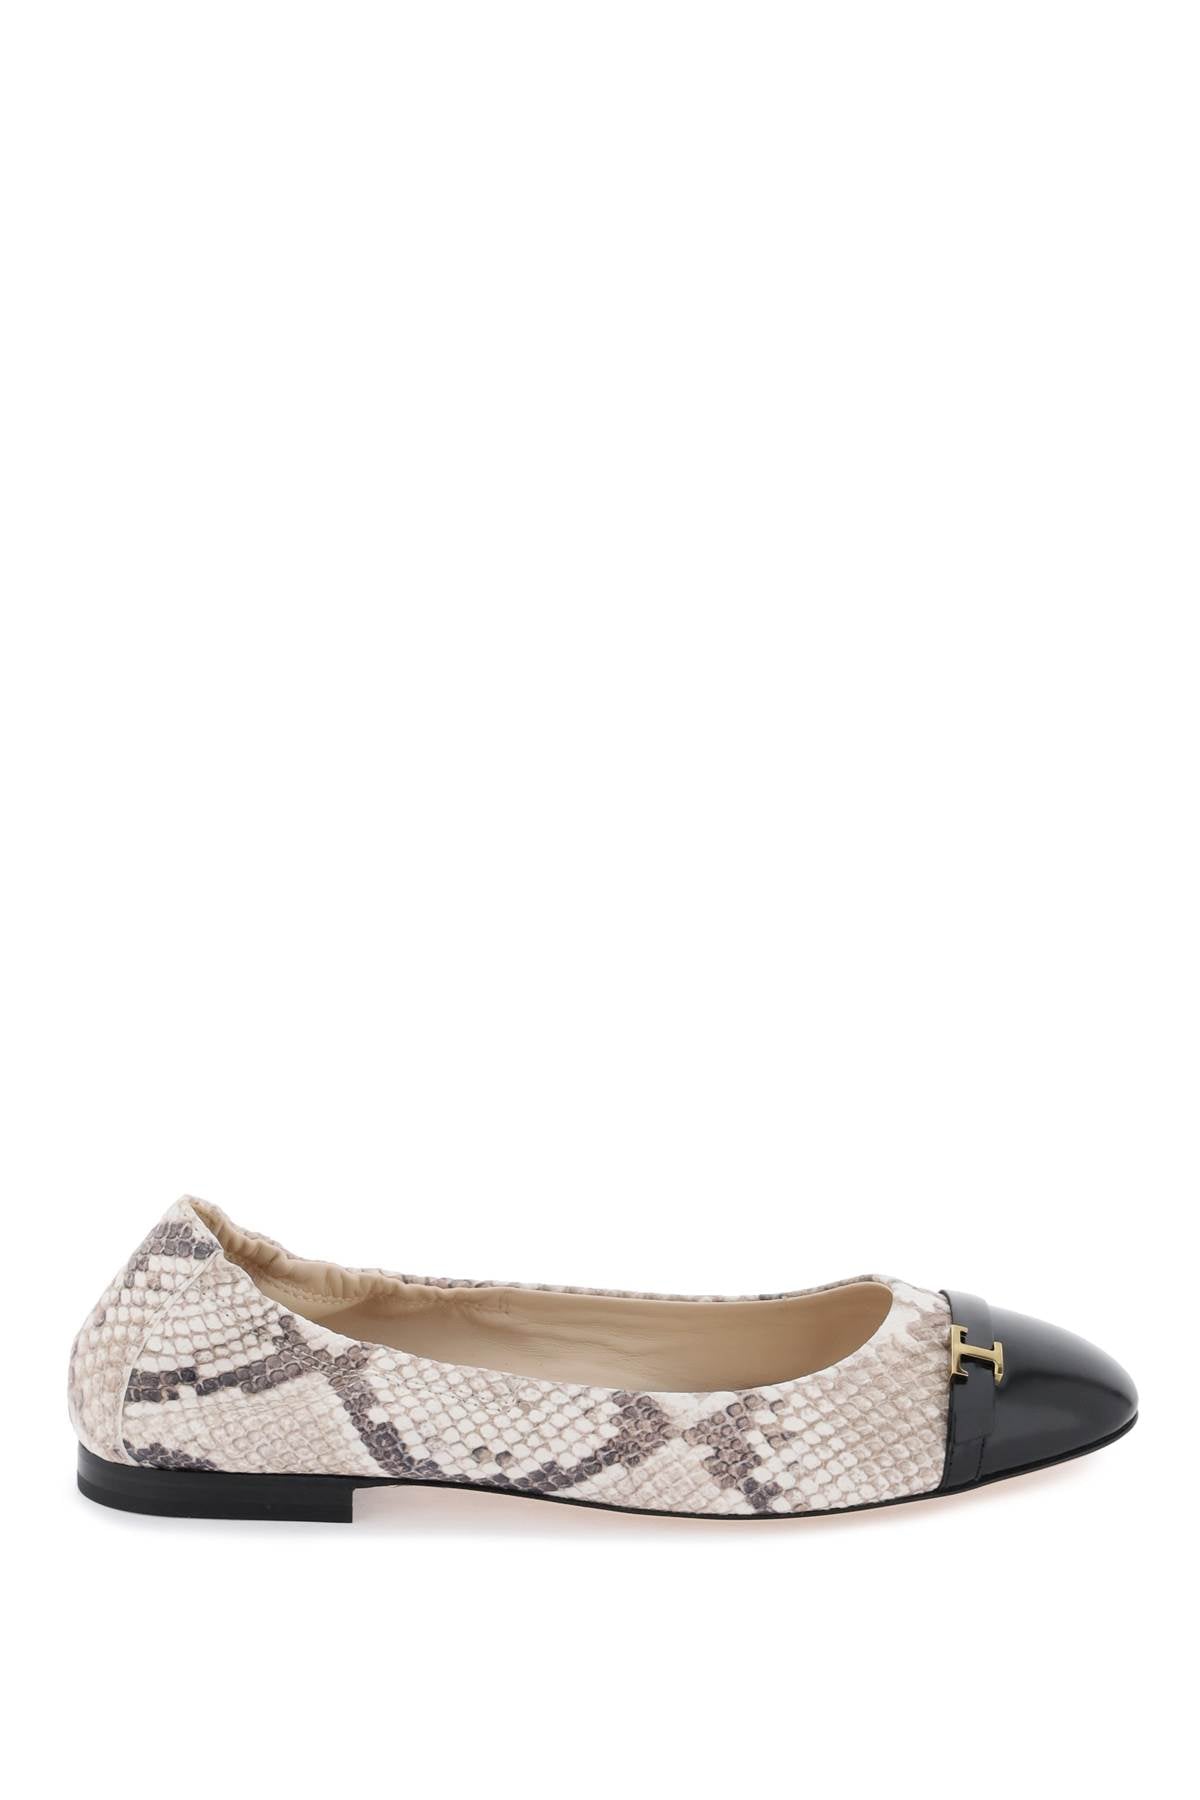 Tod's snake-printed leather ballet flats-women > shoes > flat shoes > ballet flats-Tod'S-Urbanheer